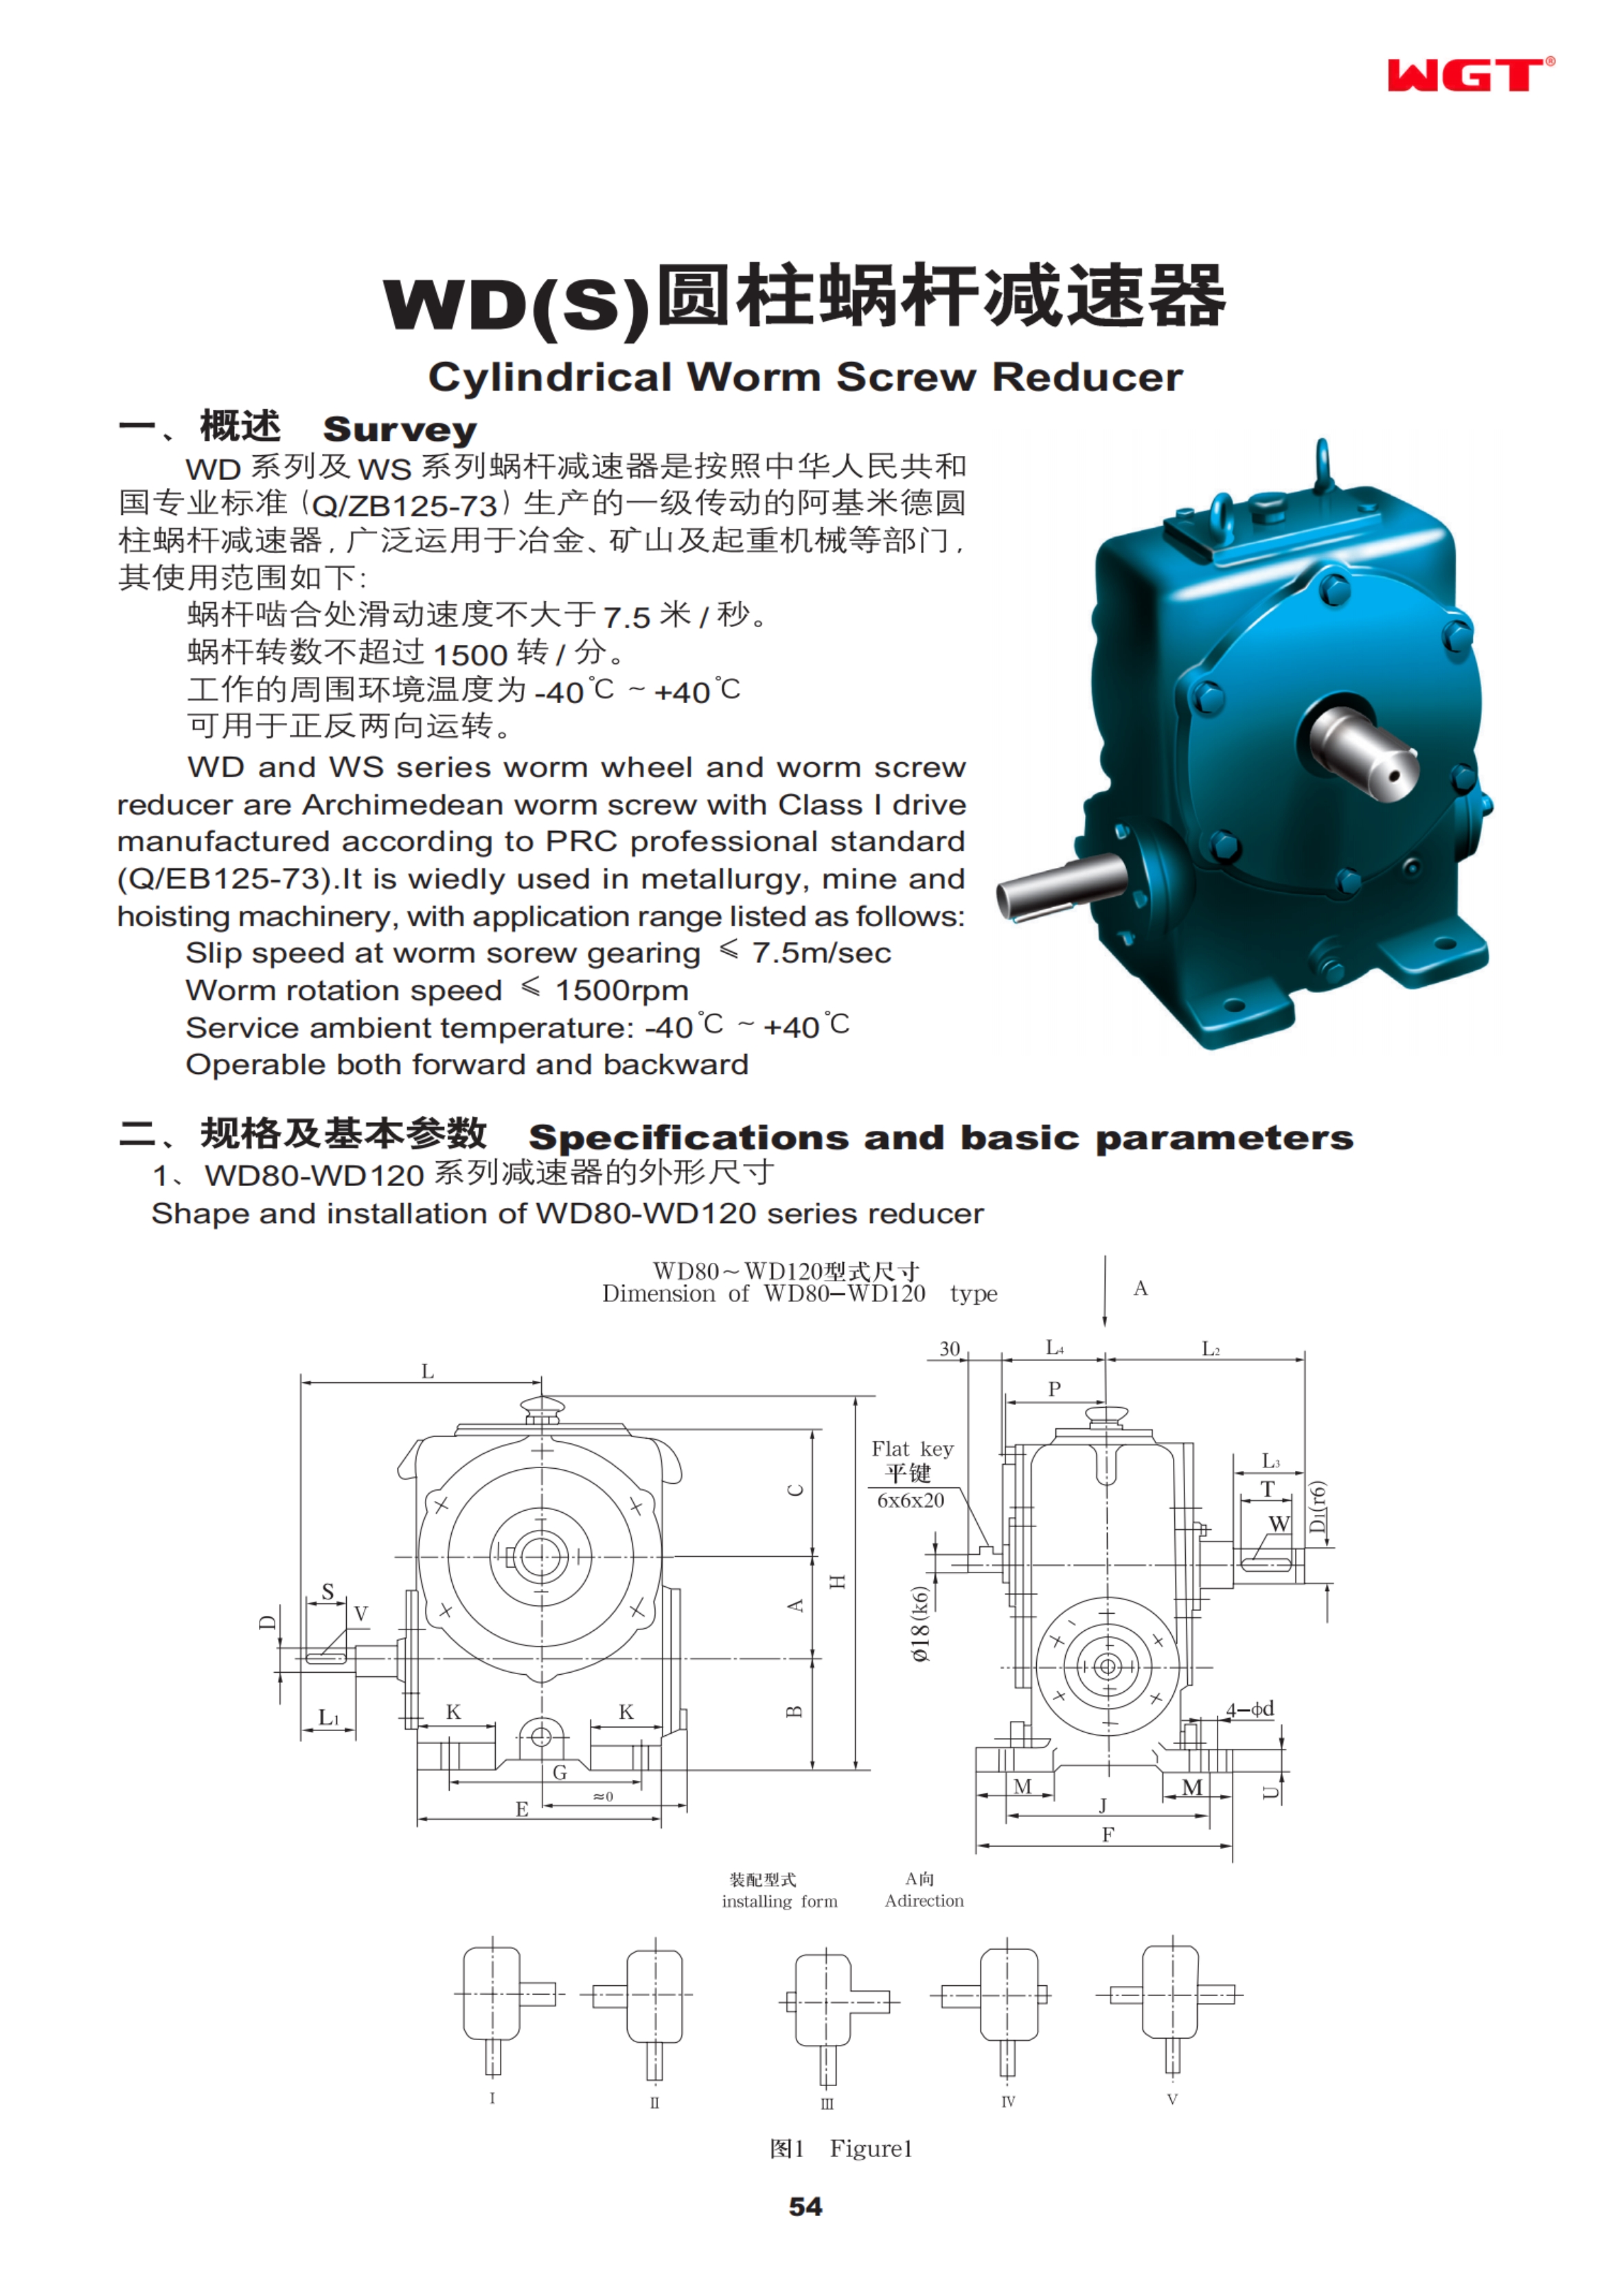 WD360 cylindrical worm reducer WGT